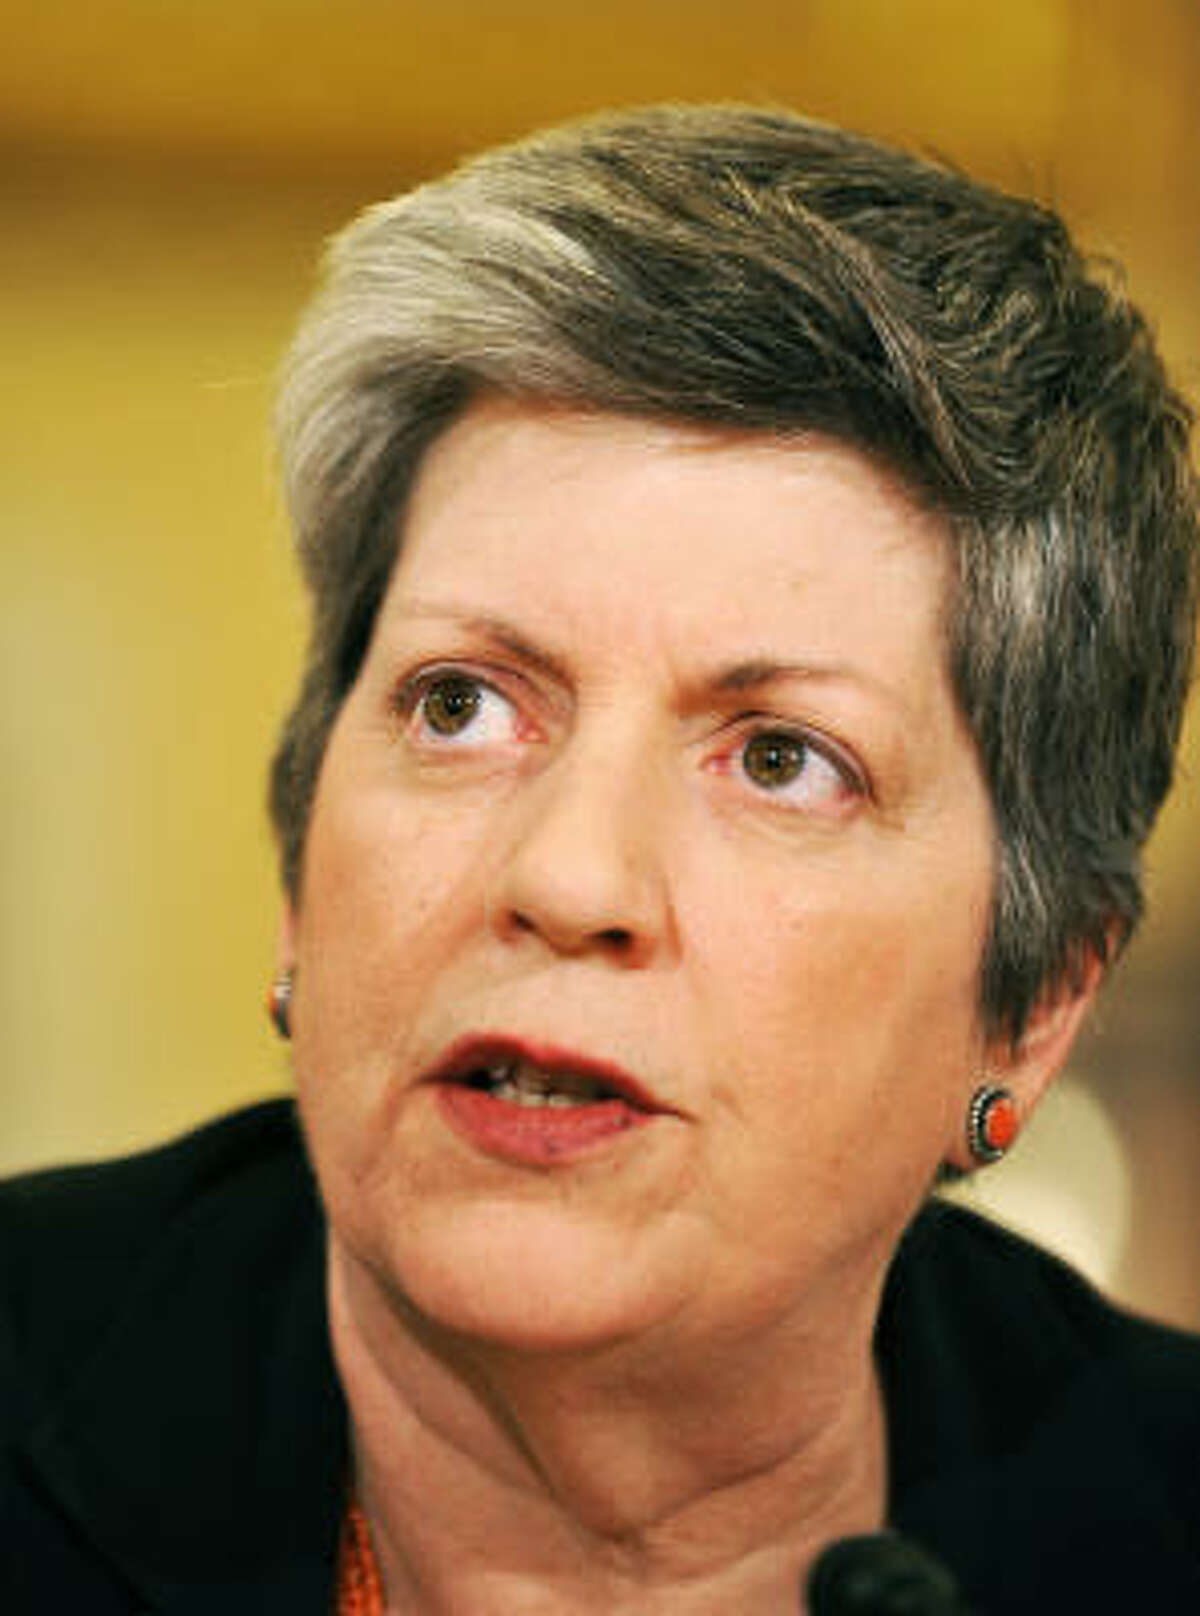 Homeland Security Secretary Janet Napolitano testifies before the House Homeland Security Committee hearing on the "President's FY2012 Budget Request for the Department of Homeland Security" at the Canon House Office building in Washington, DC, on March 3, 2011.